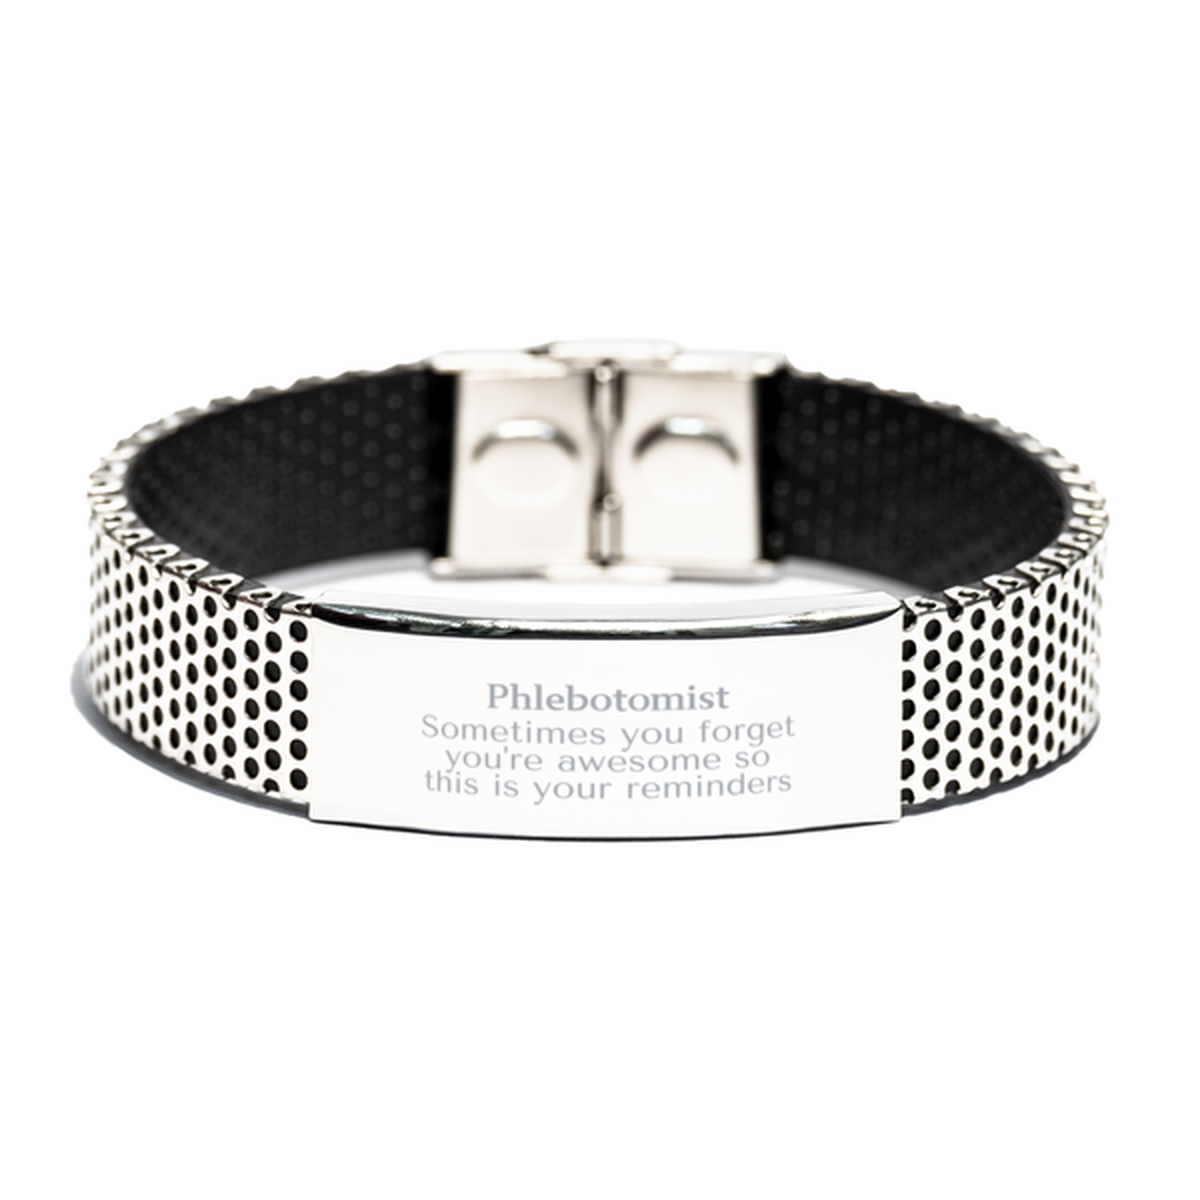 Sentimental Phlebotomist Stainless Steel Bracelet, Phlebotomist Sometimes you forget you're awesome so this is your reminders, Graduation Christmas Birthday Gifts for Phlebotomist, Men, Women, Coworkers